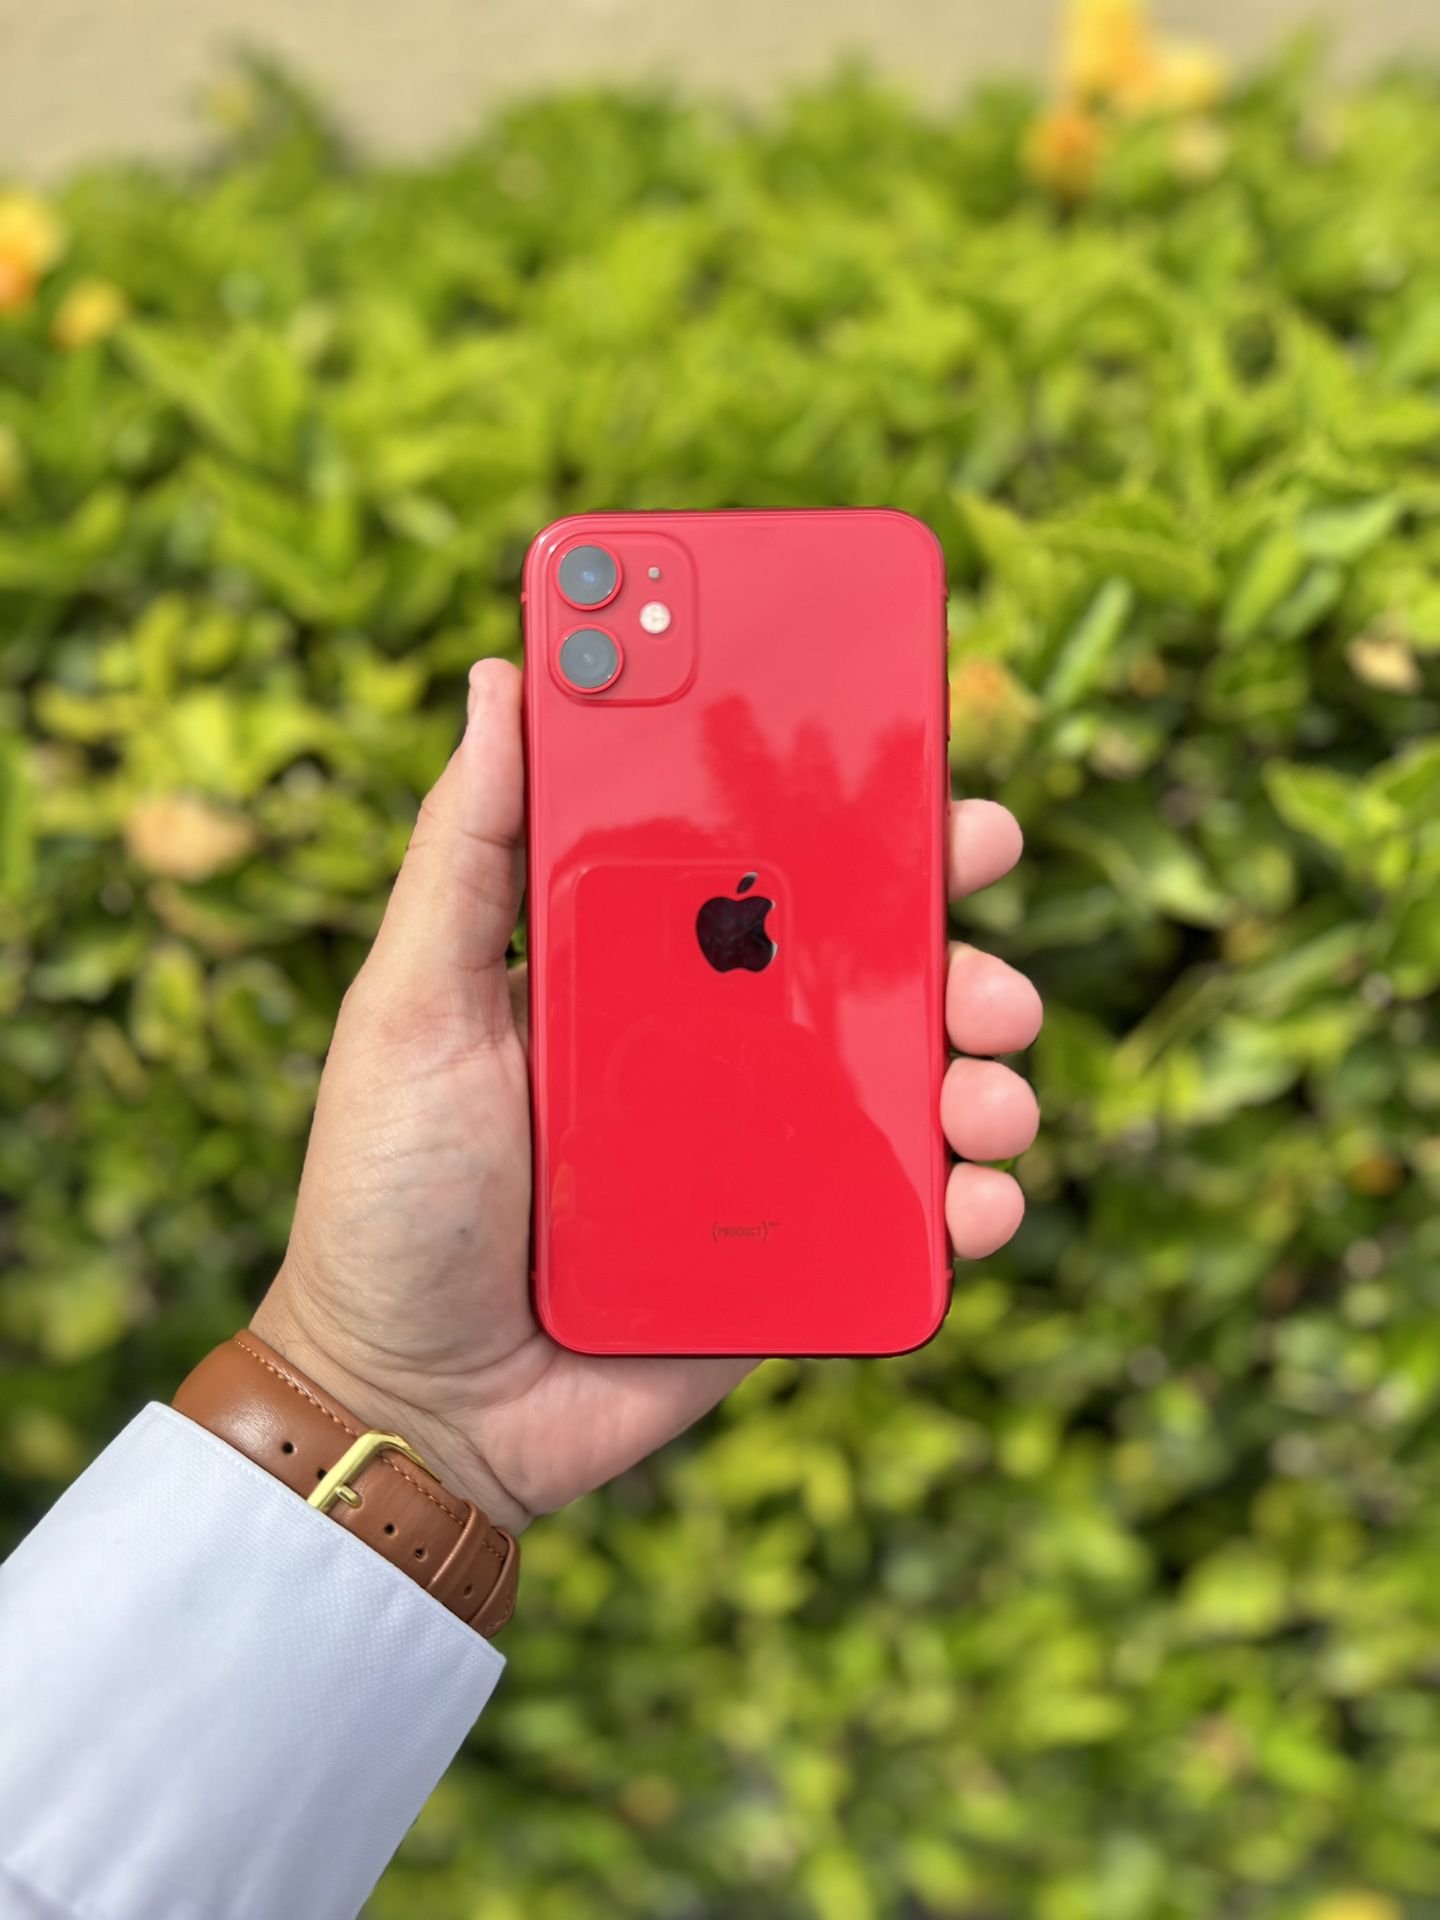 iPhone 11 red  64 GB UNLOCKED. USE ANY CARRIER. Pristine  Like New! condition| 100% battery health. Hablo espanol   